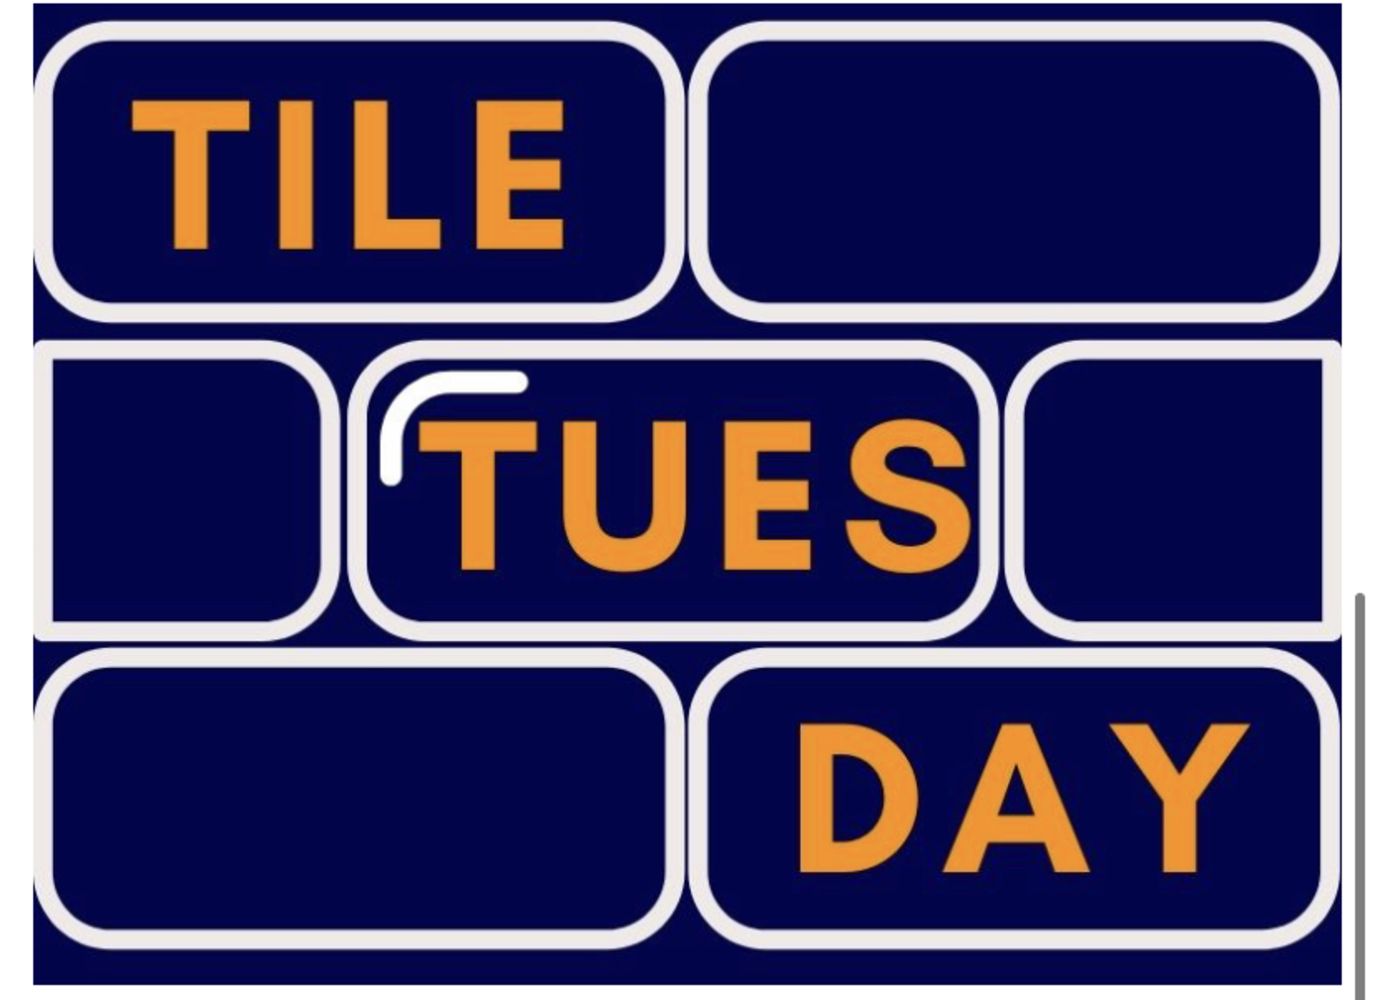 No Reserve - Tile Tuesday - “over £80k worth of tiles – Sourced from Johnsons Tiles” - 6th July 2021